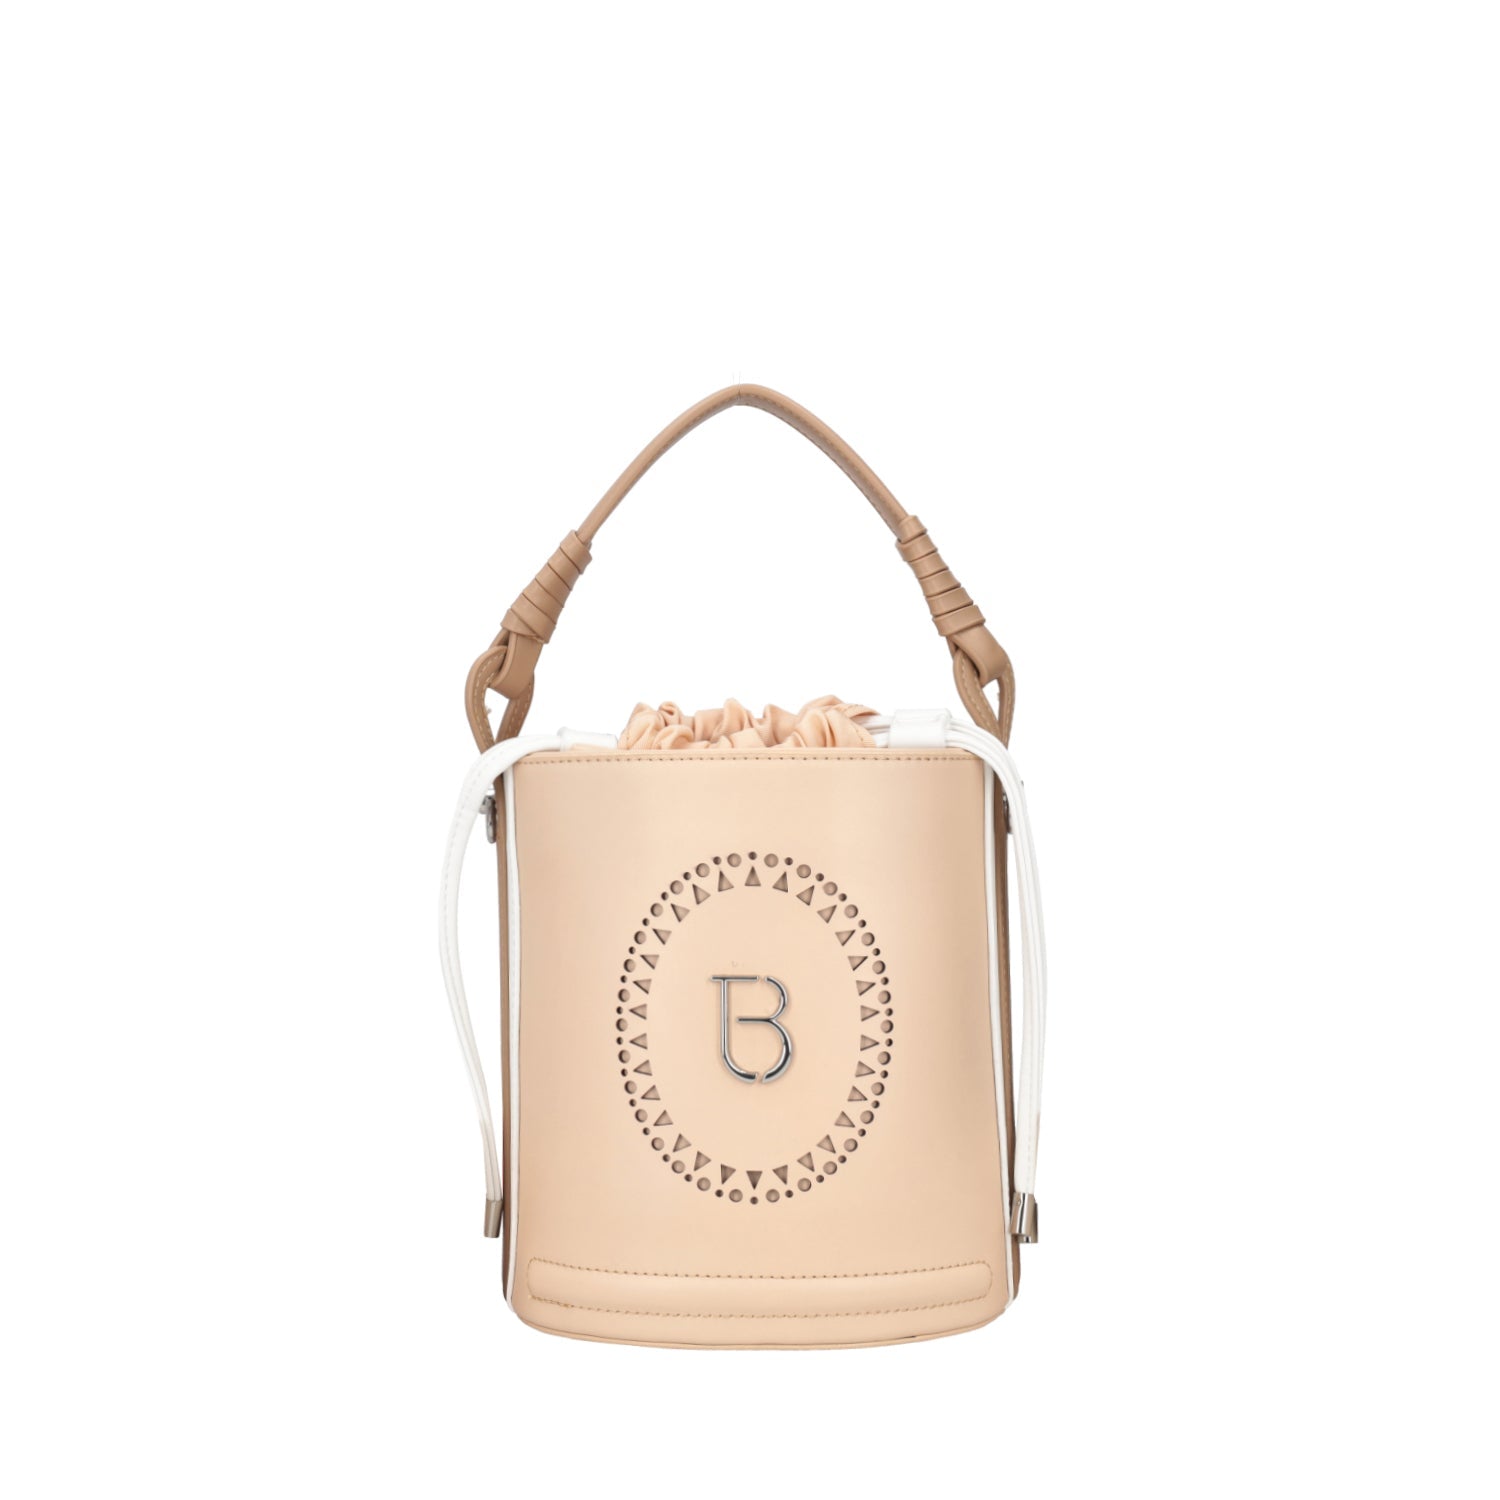 NATURAL ORTENSIA BUCKET WITH SHOULDER STRAP